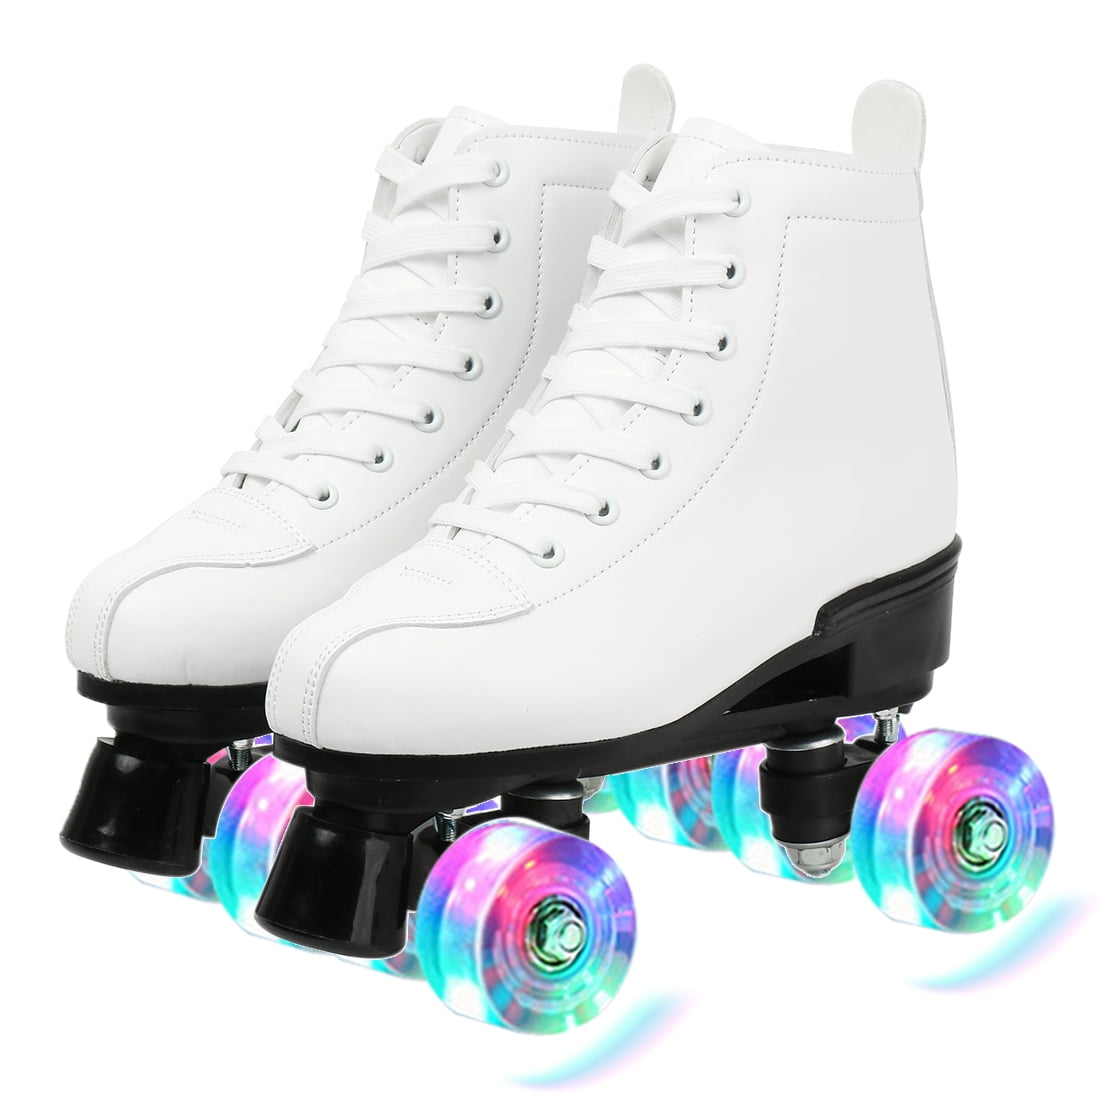 Women's Roller Skates Classic Leather High Top Double Row Skates Four-Wheel Shiny Roller Skates Perfect Indoor Outdoor Adult Roller Skates with Bag 